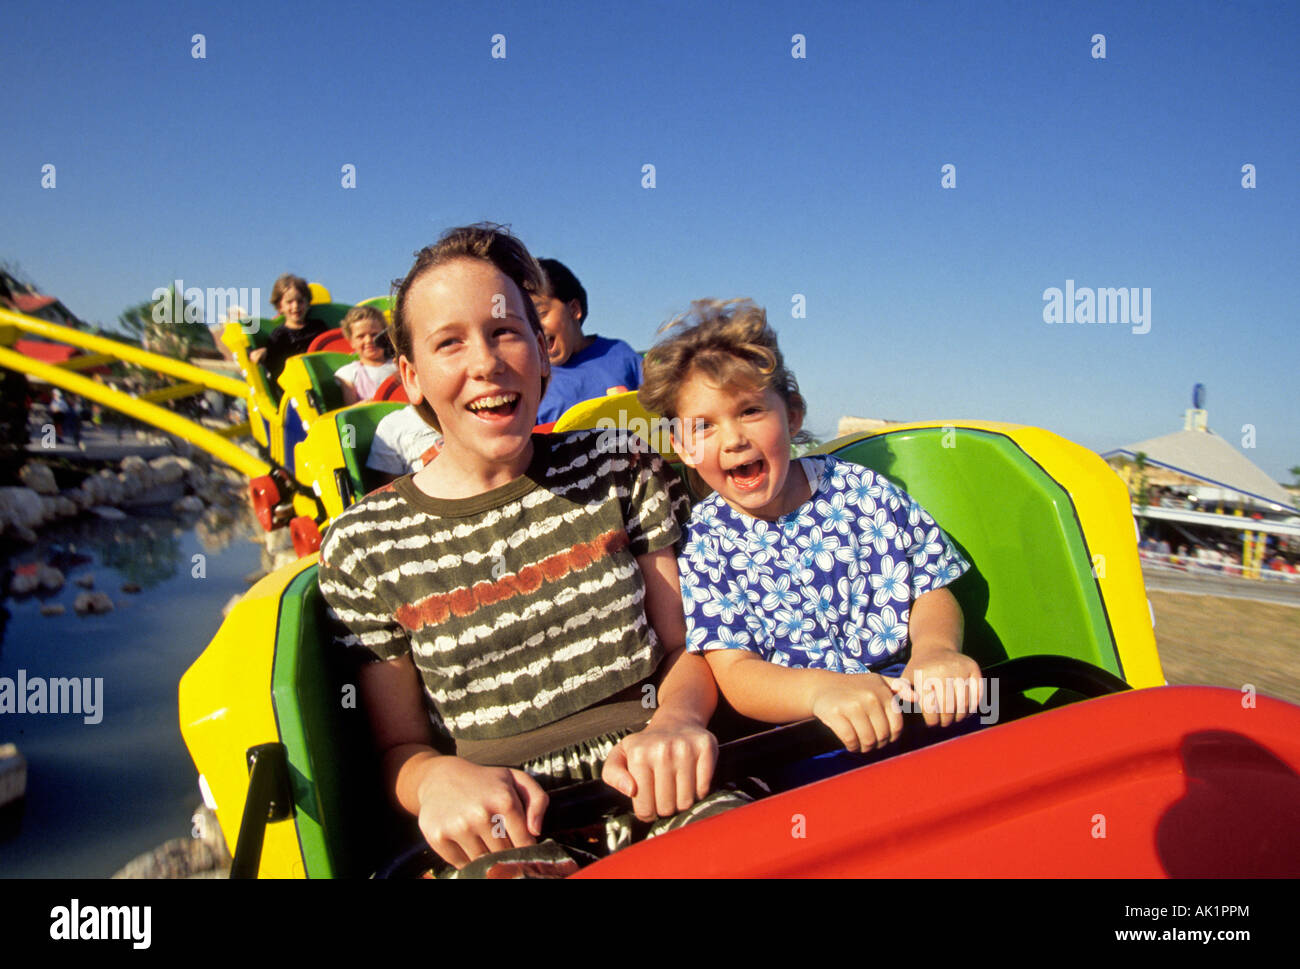 Two children scream with joy during a roller coaster ride at Fiesta Texas a large themepark Stock Photo